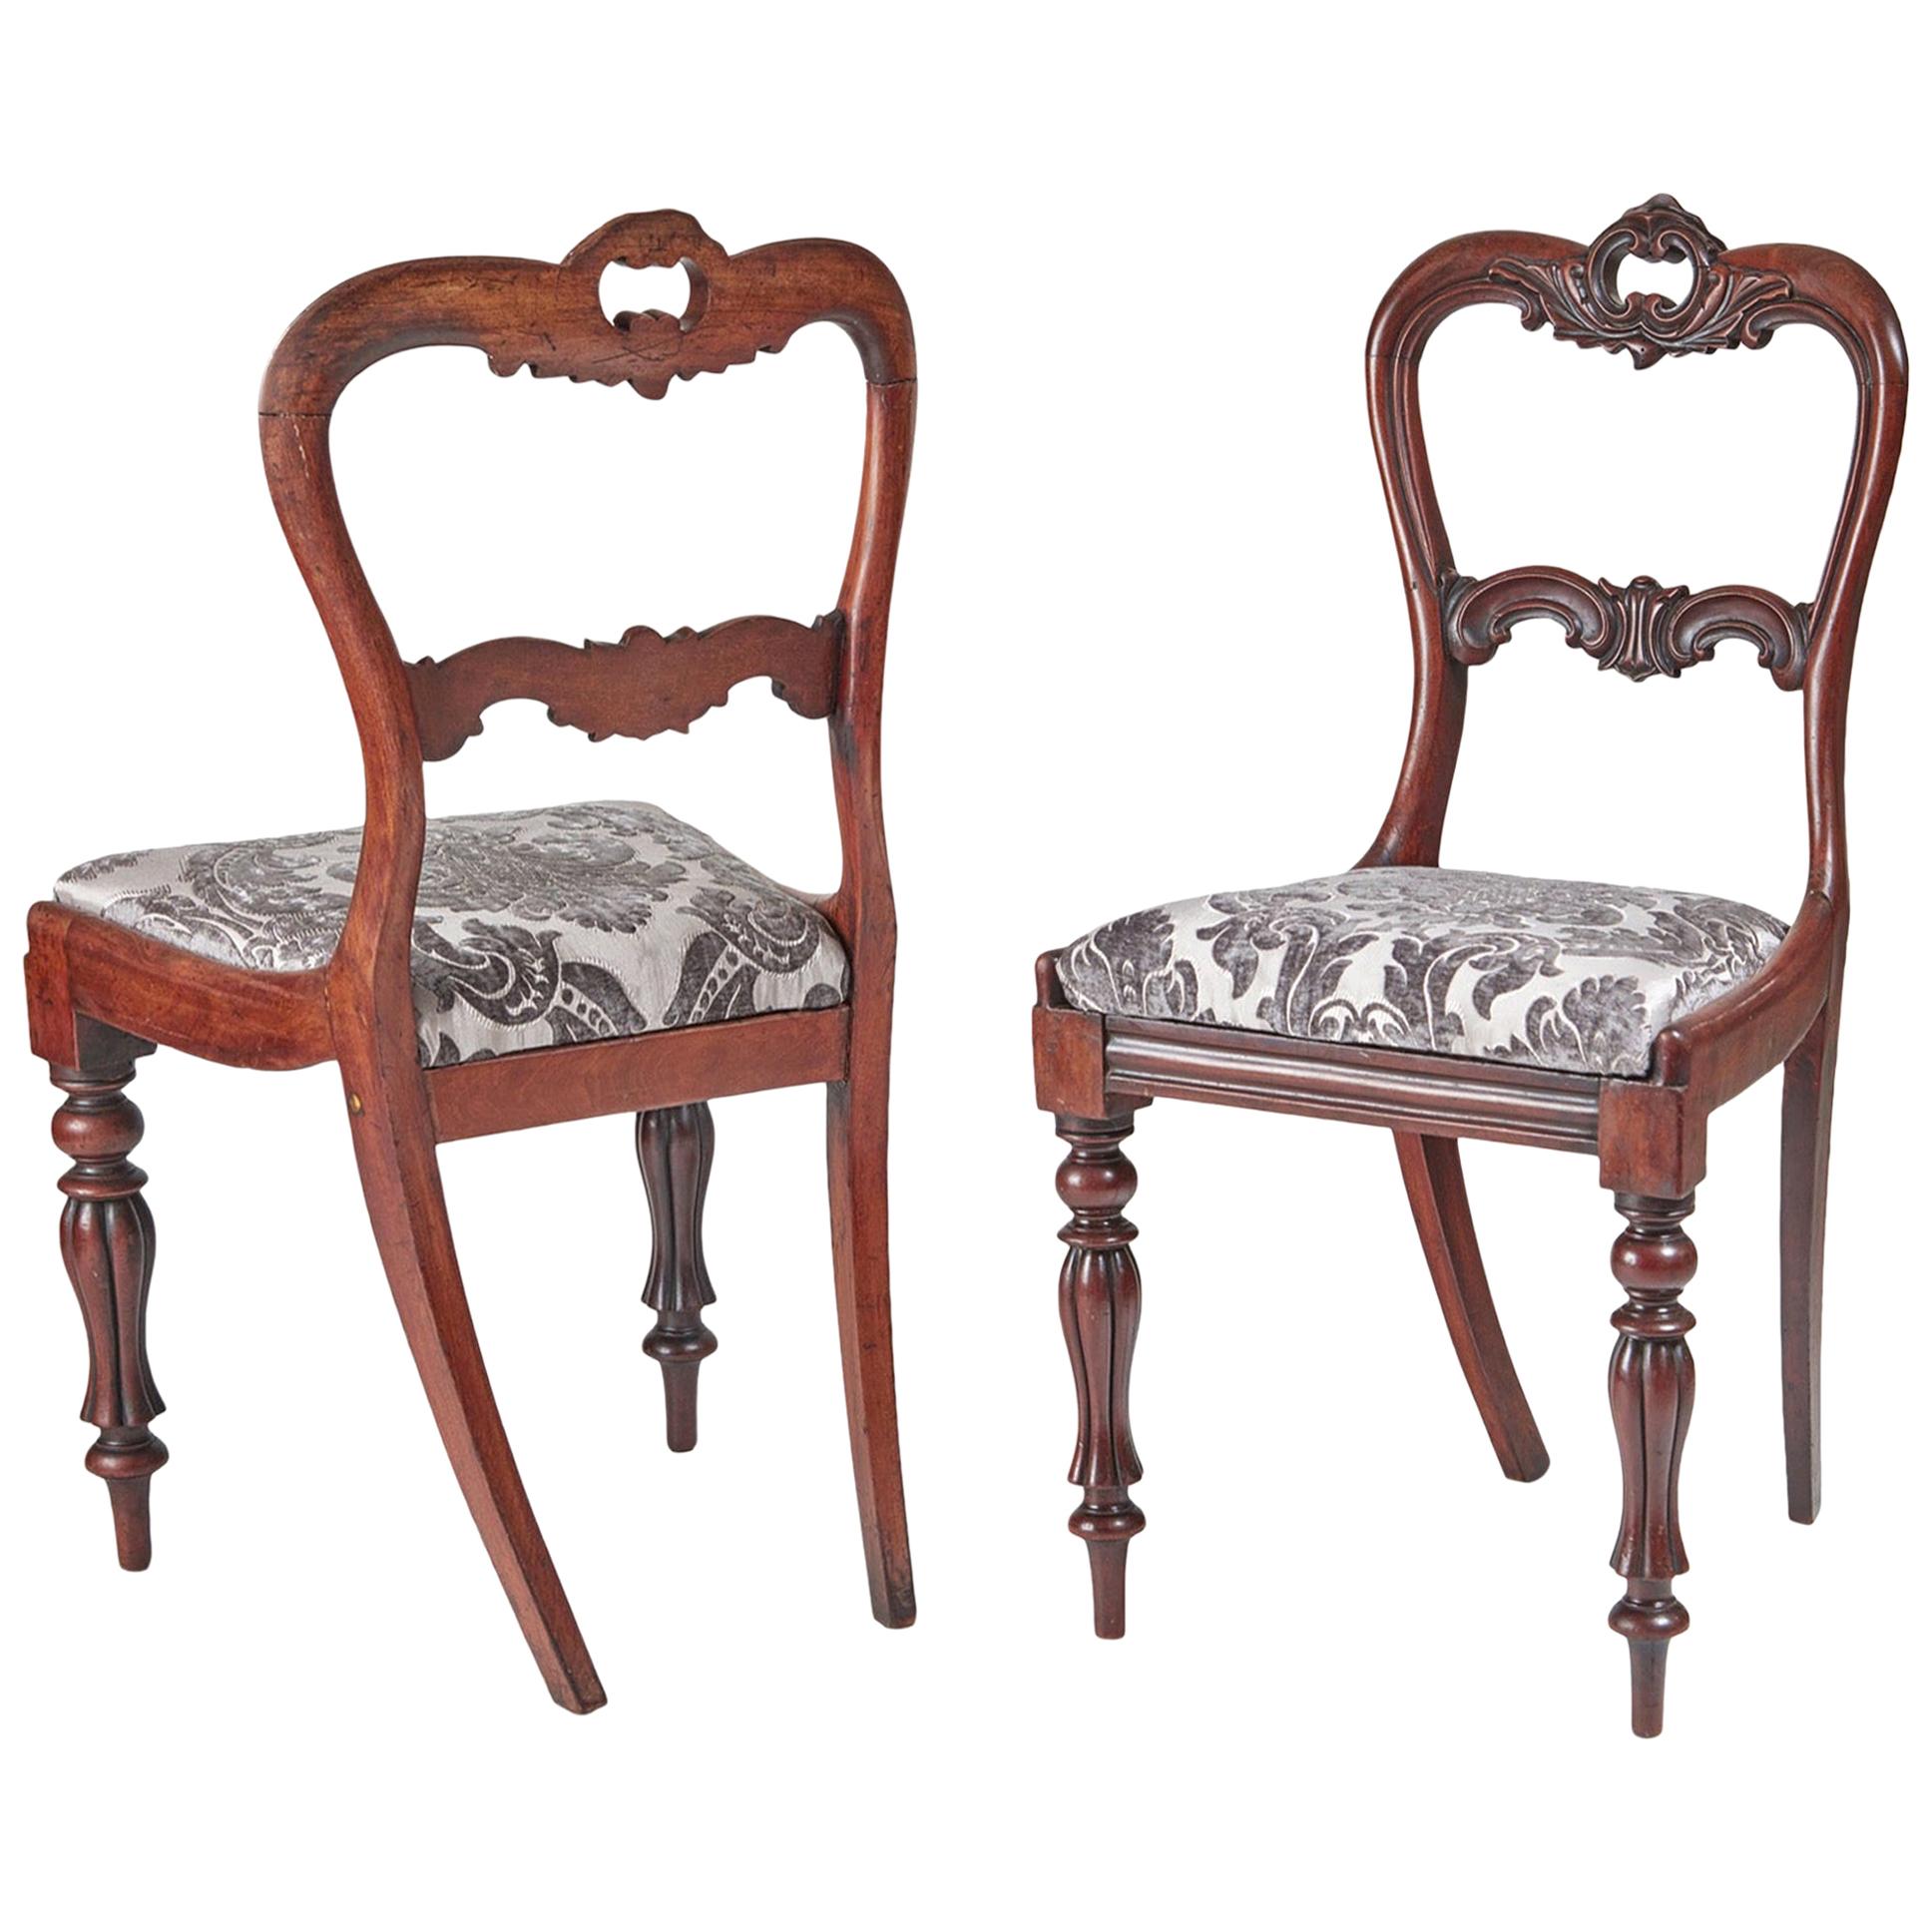 Quality Pair of Antique William IV Carved Hardwood Side/Desk Chairs, circa 1830